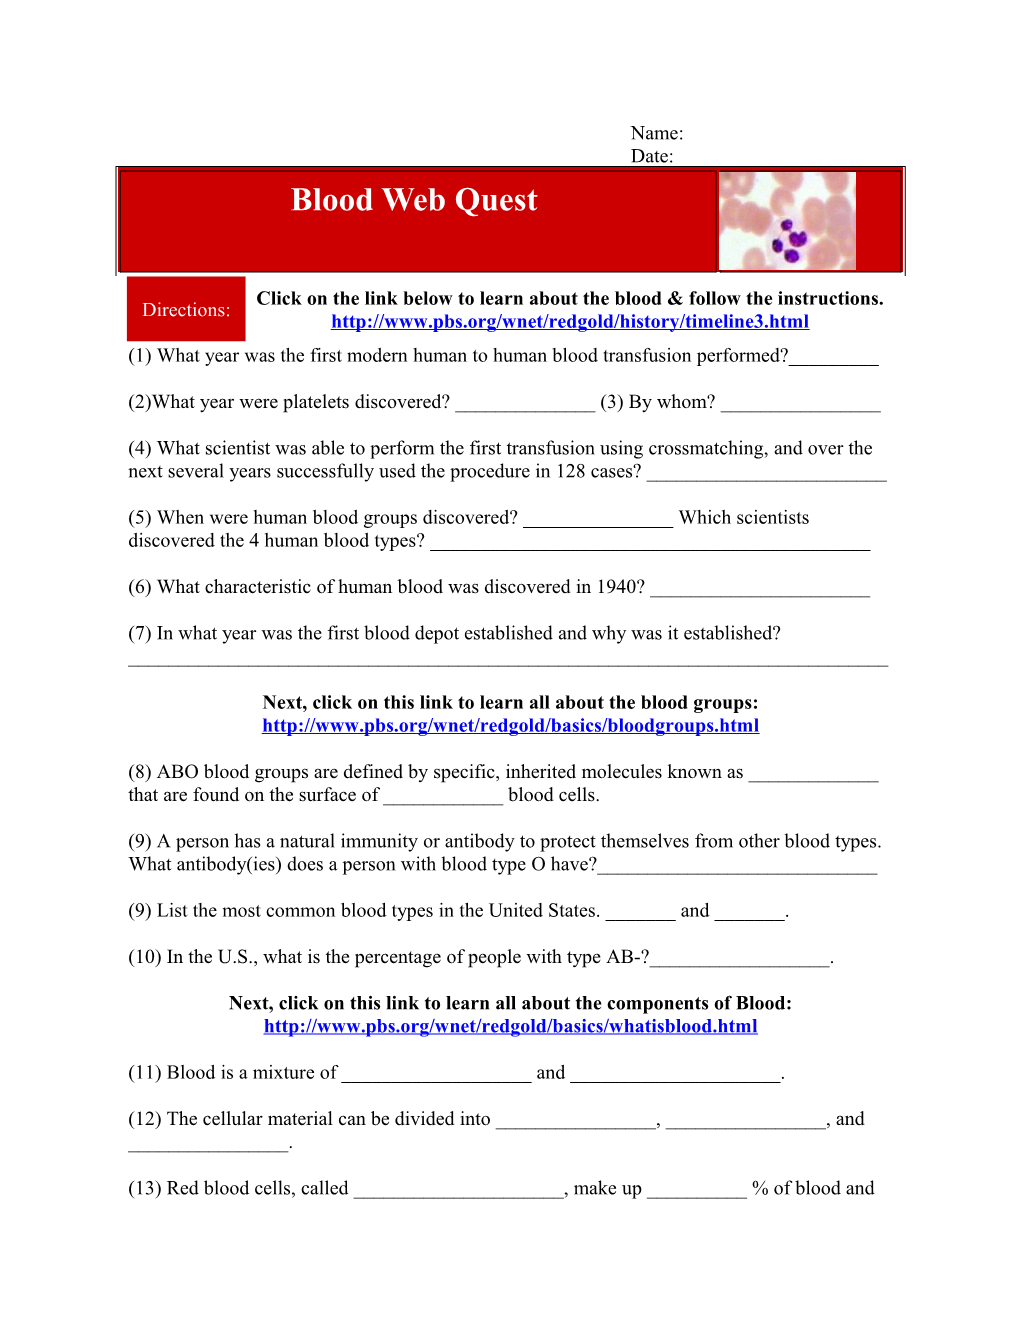 Physiology: Blood Web Quest s1